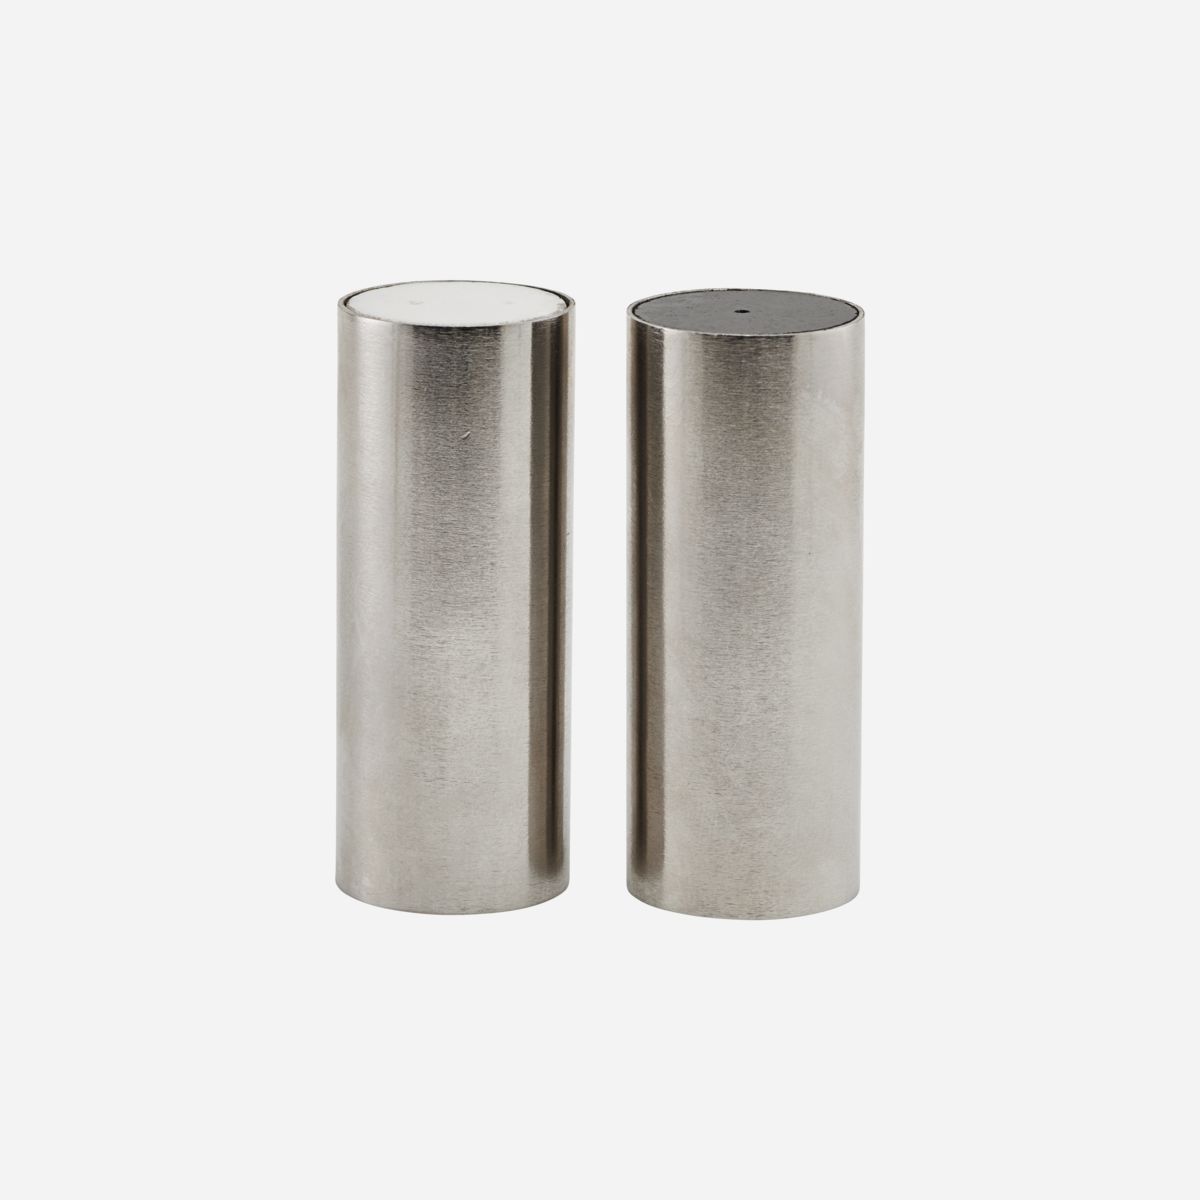 Salt and pepper Tall Brushed silver finish